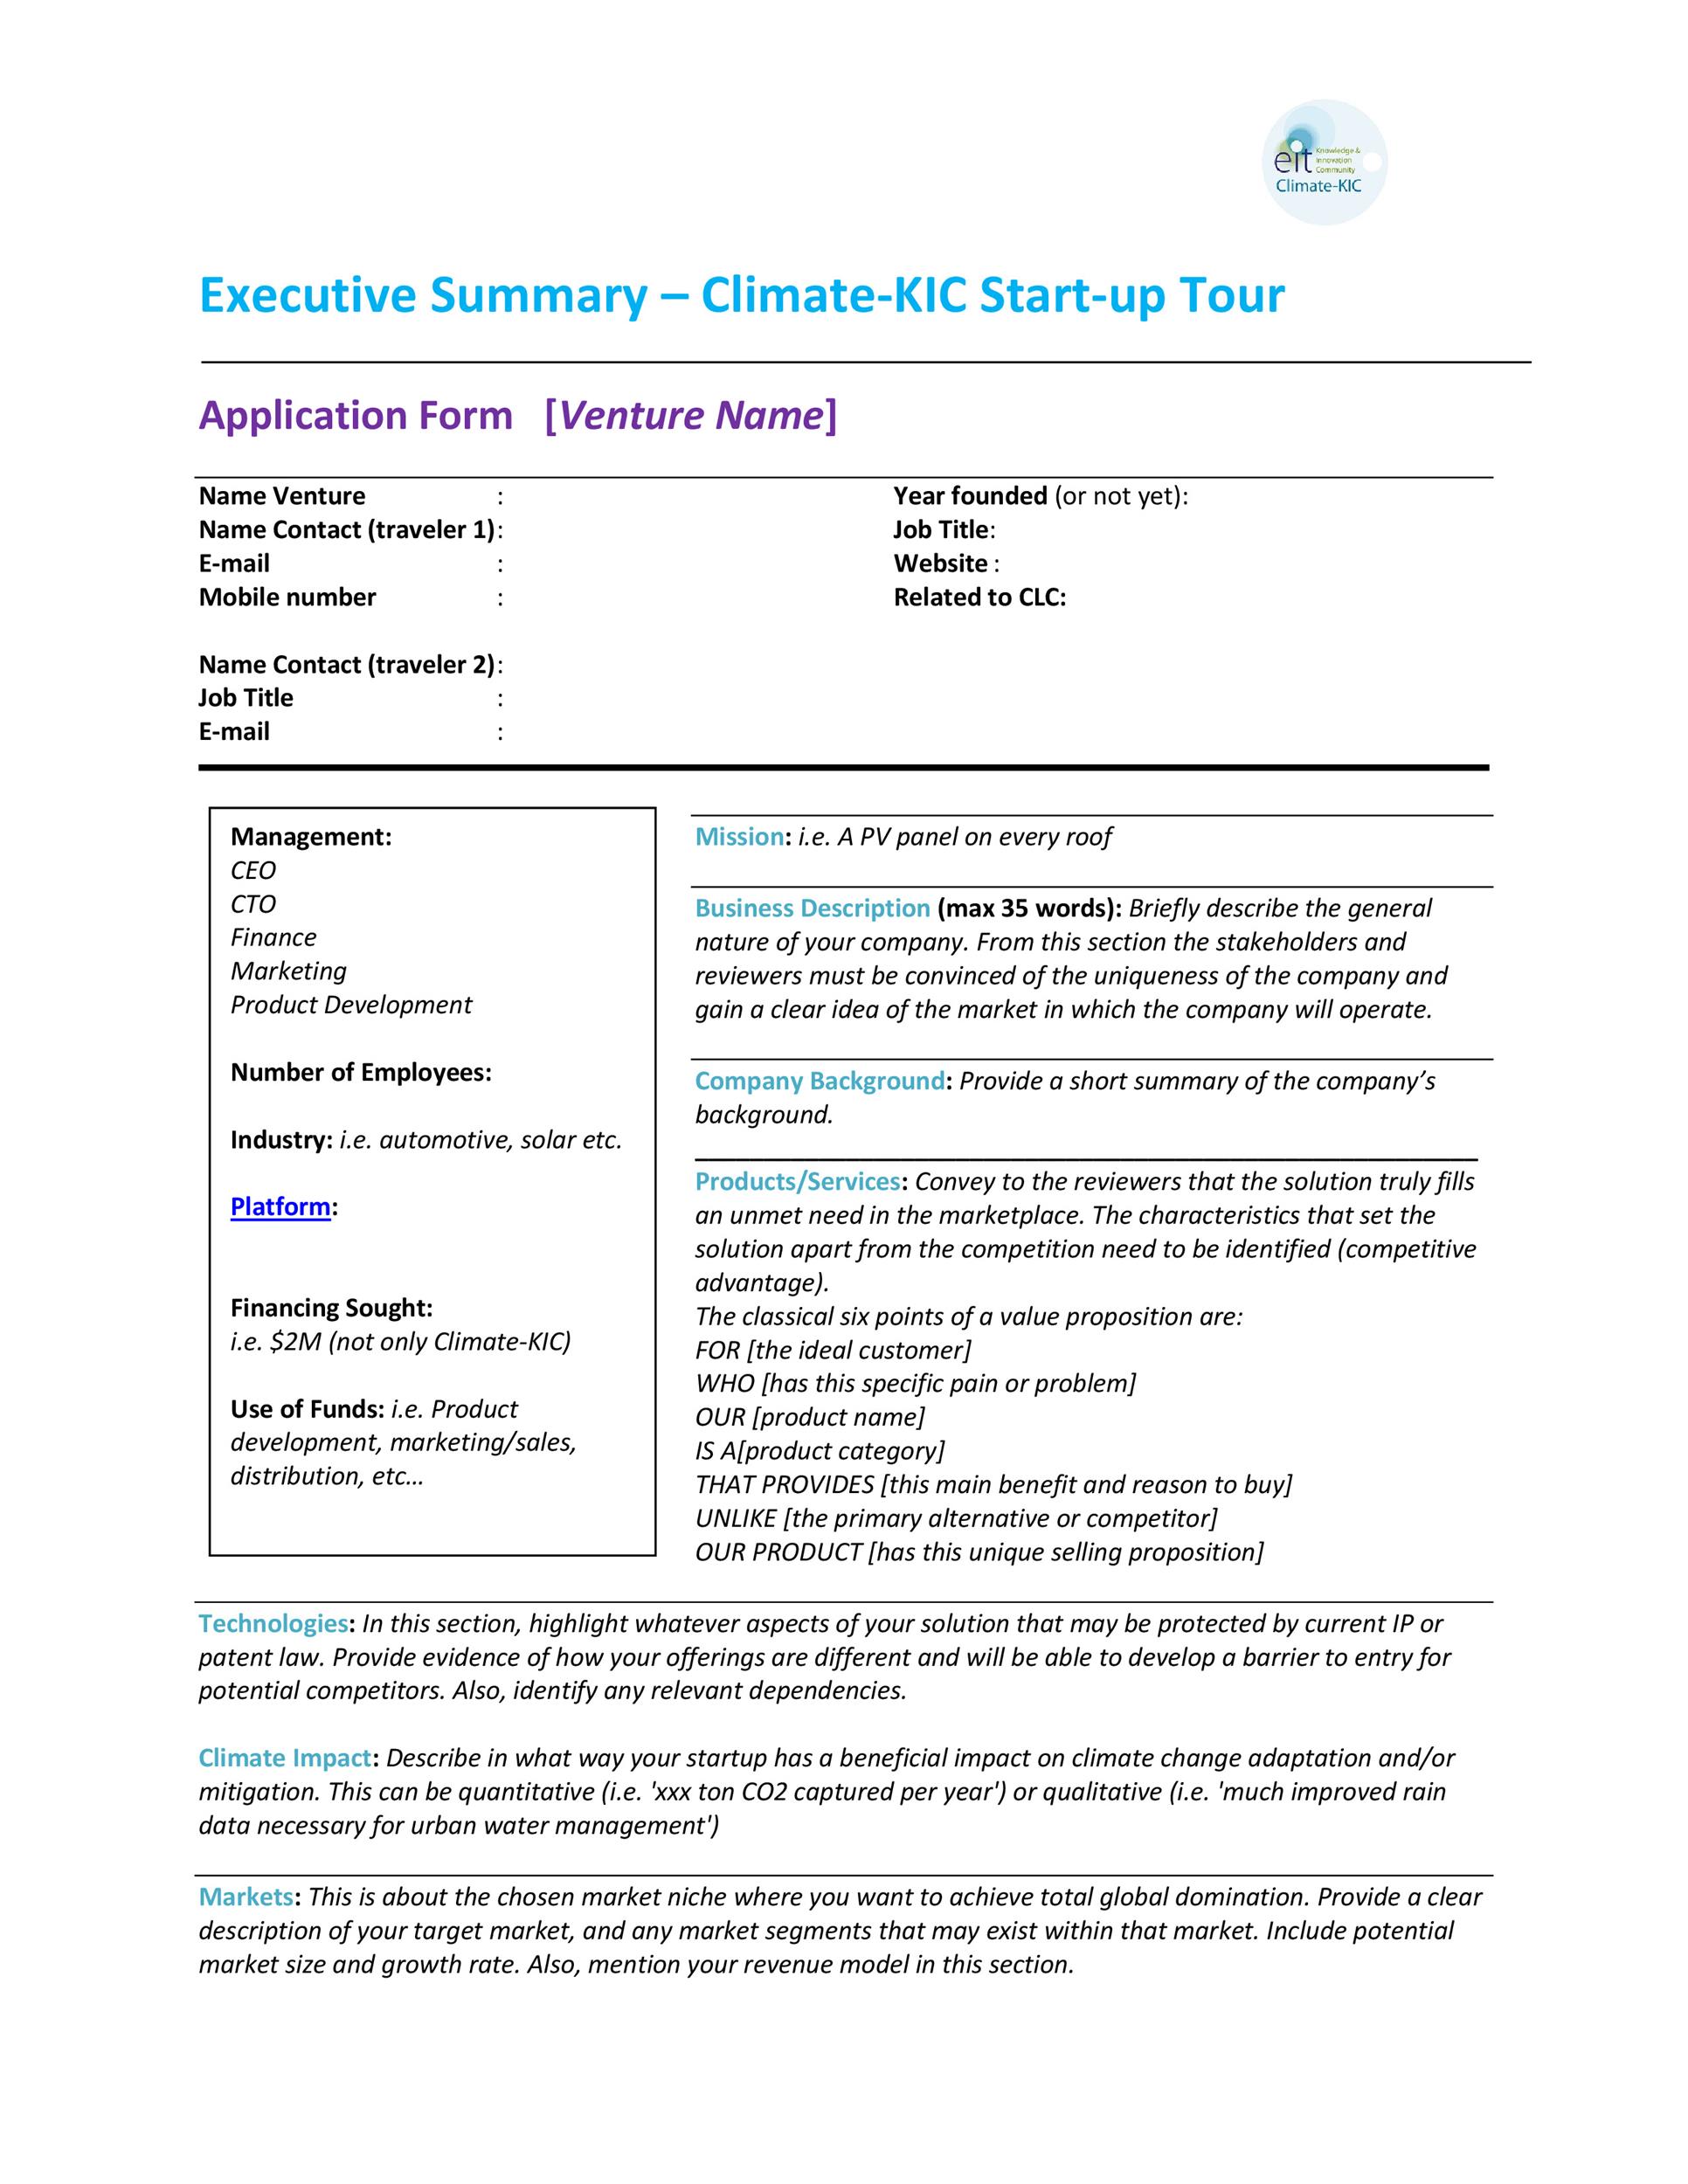 30+ Perfect Executive Summary Examples & Templates ᐅ TemplateLab